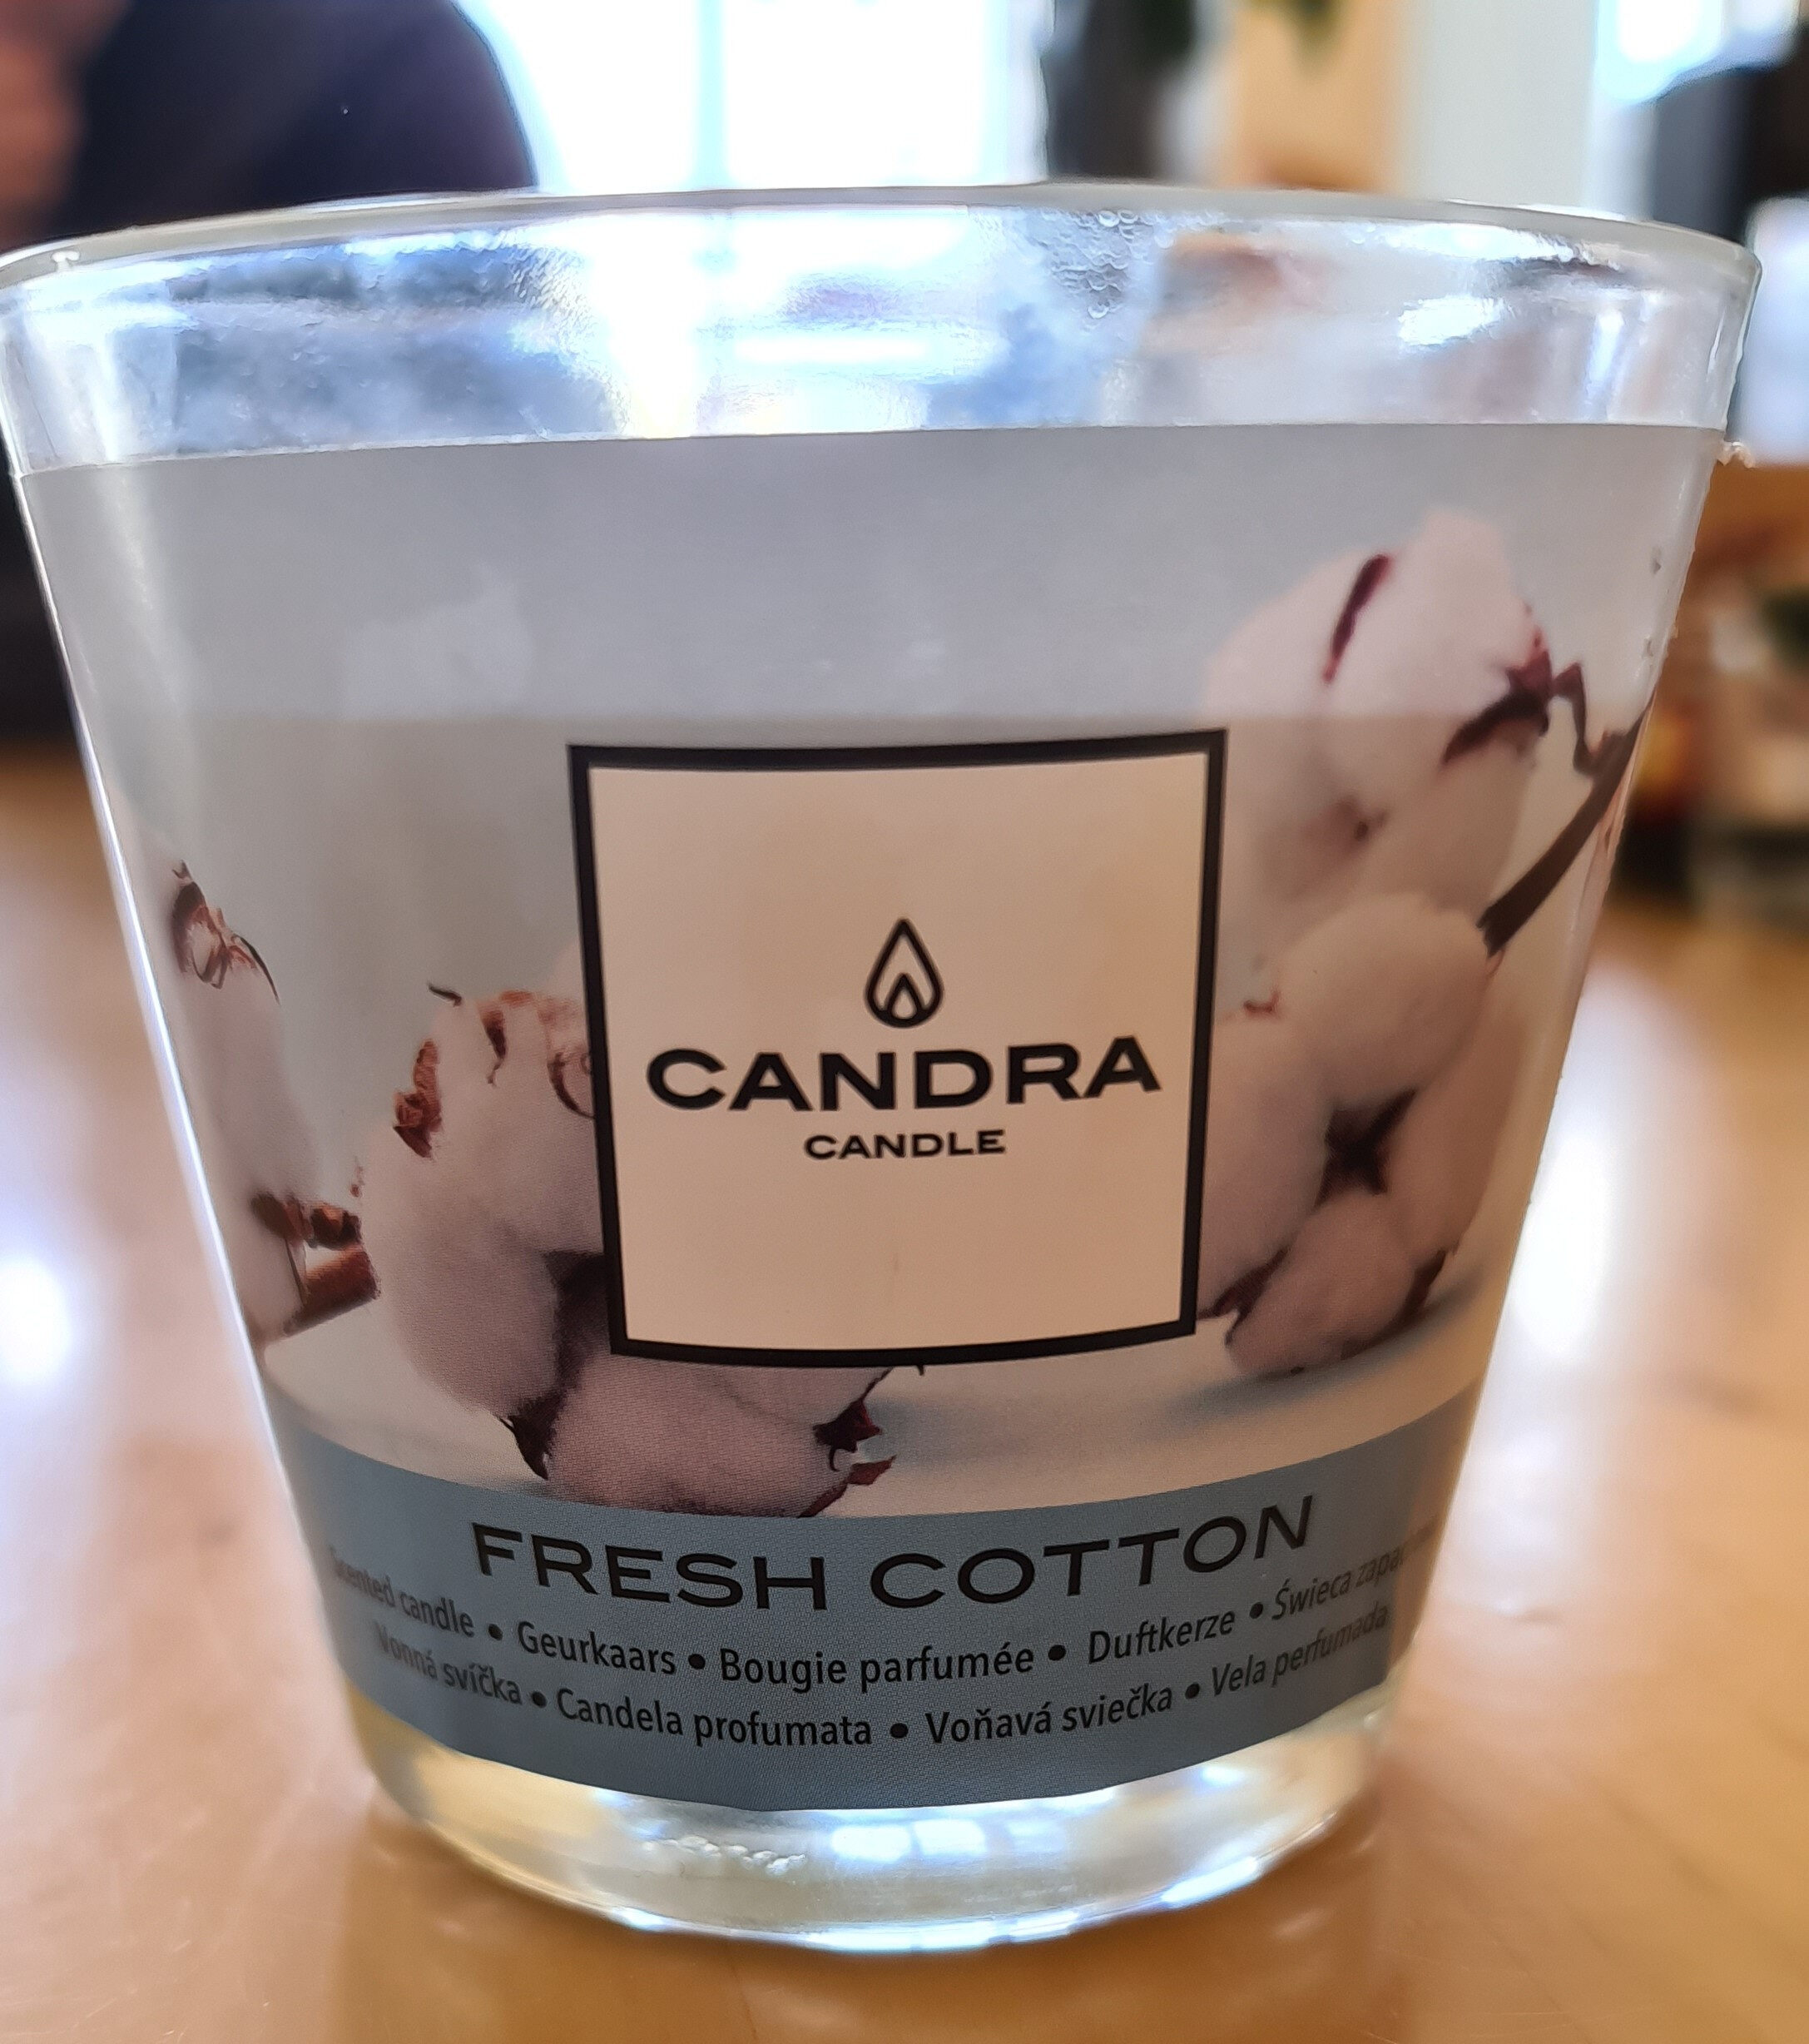 Candra candle fresh cotton - Product - fr